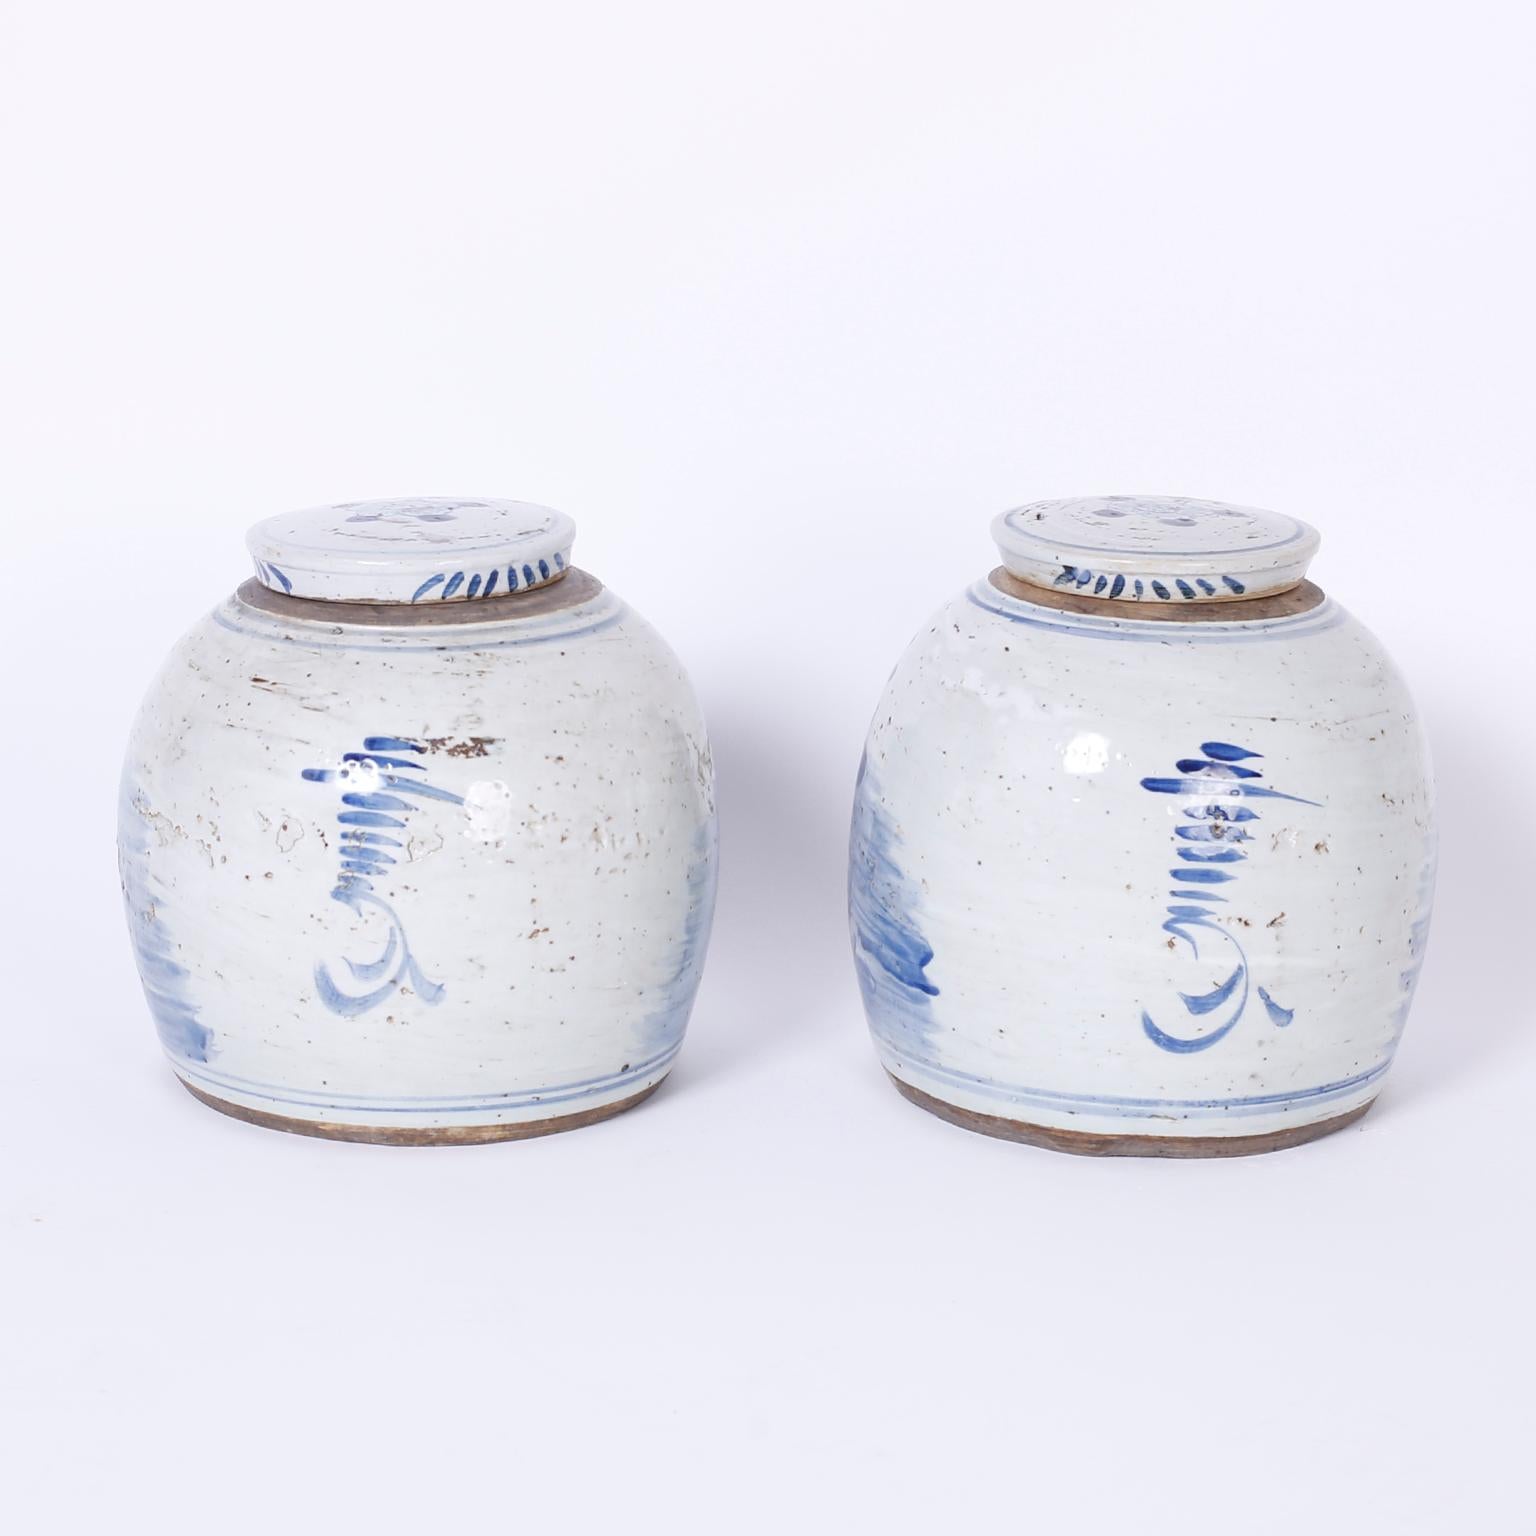 Pair of Chinese export style blue and white porcelain ginger jars having a classic bulb form with removable lids and decorated with charming birds and flowers on the fronts.